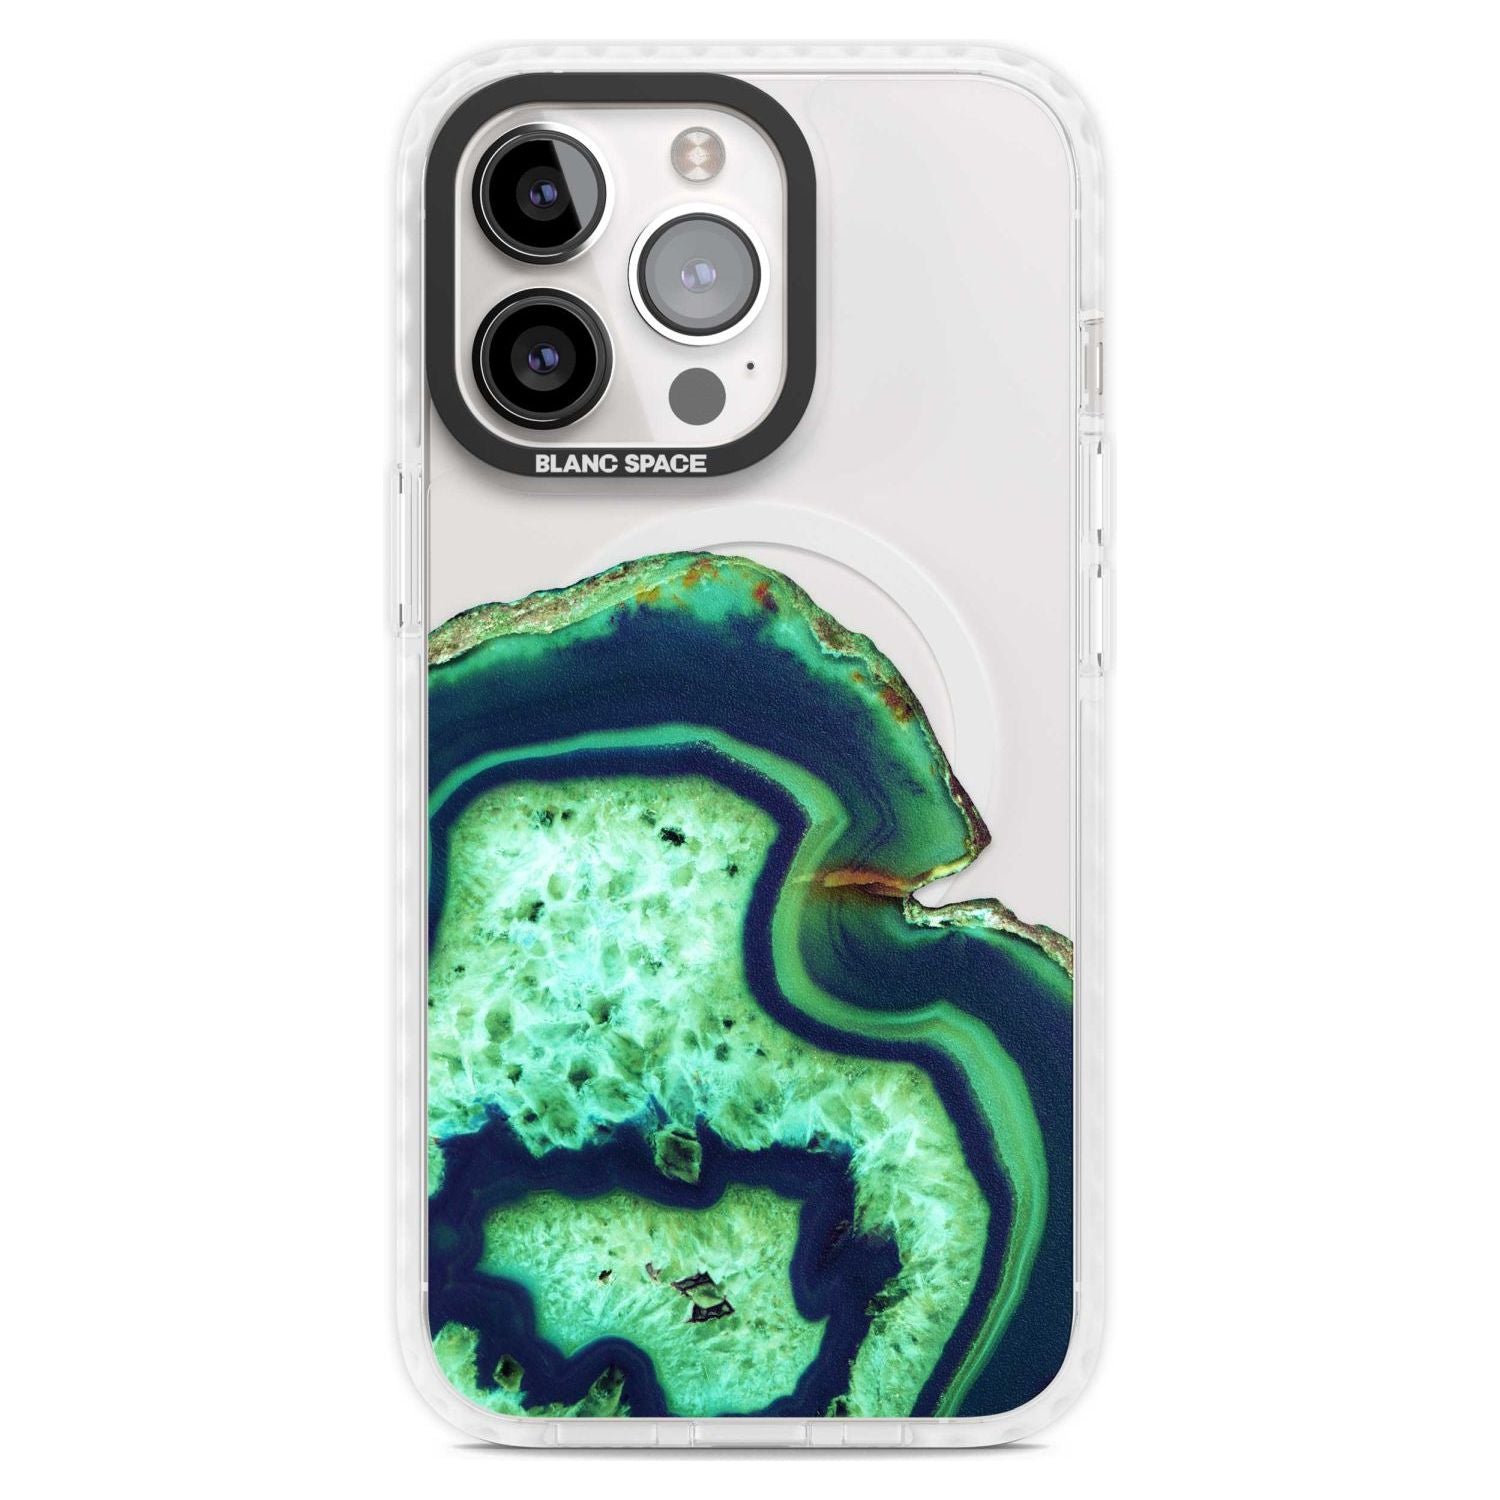 Neon Green & Blue Agate Crystal Transparent Design Phone Case iPhone 15 Pro Max / Magsafe Impact Case,iPhone 15 Pro / Magsafe Impact Case Blanc Space